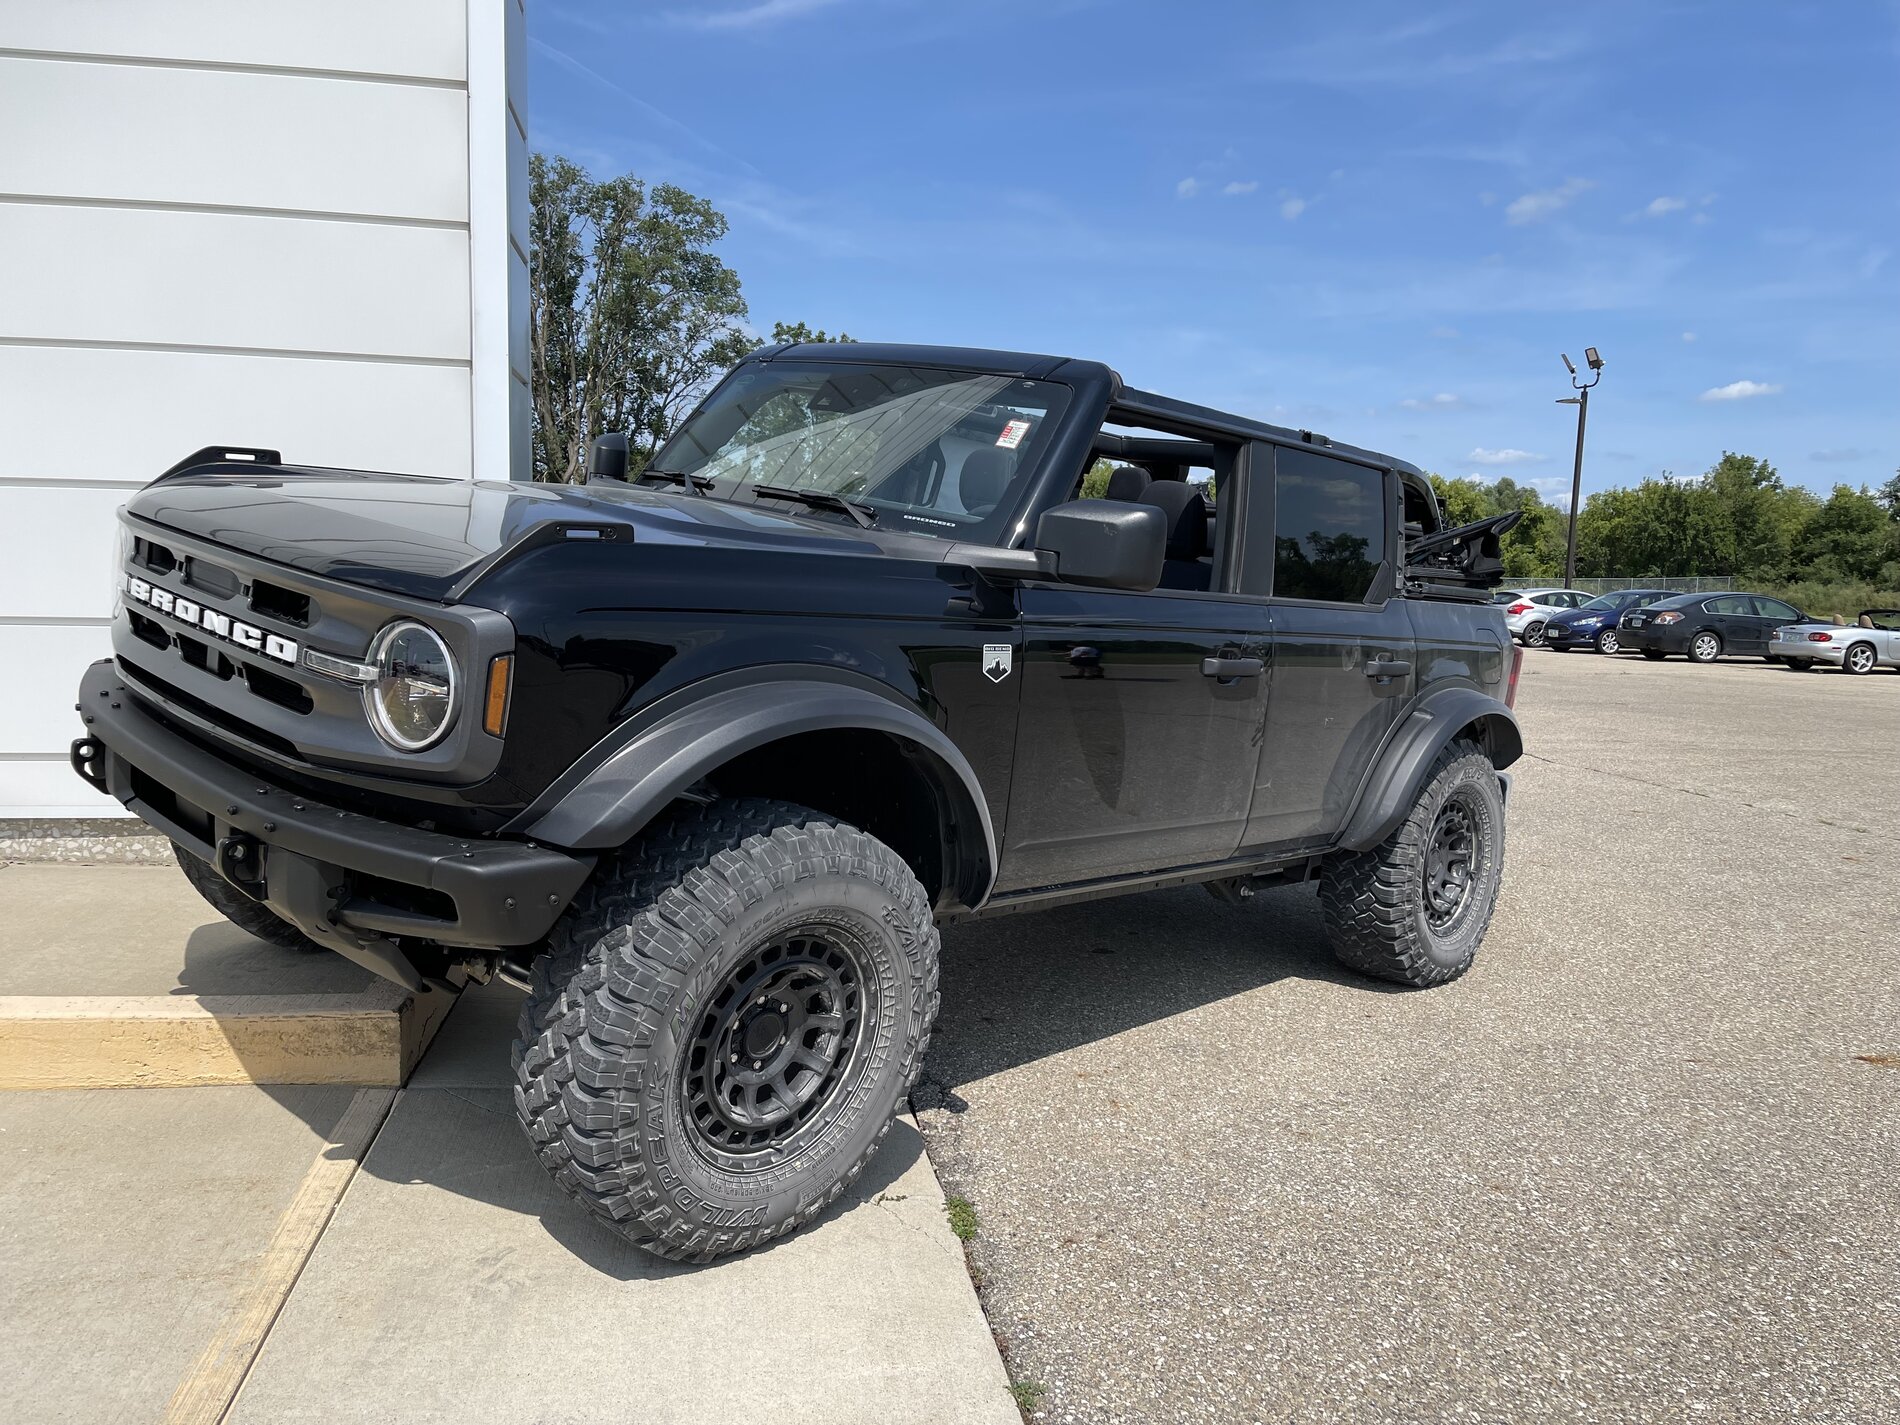 Bronco Level Package by Granger | Bronco6G - 2021+ Ford Bronco Forum